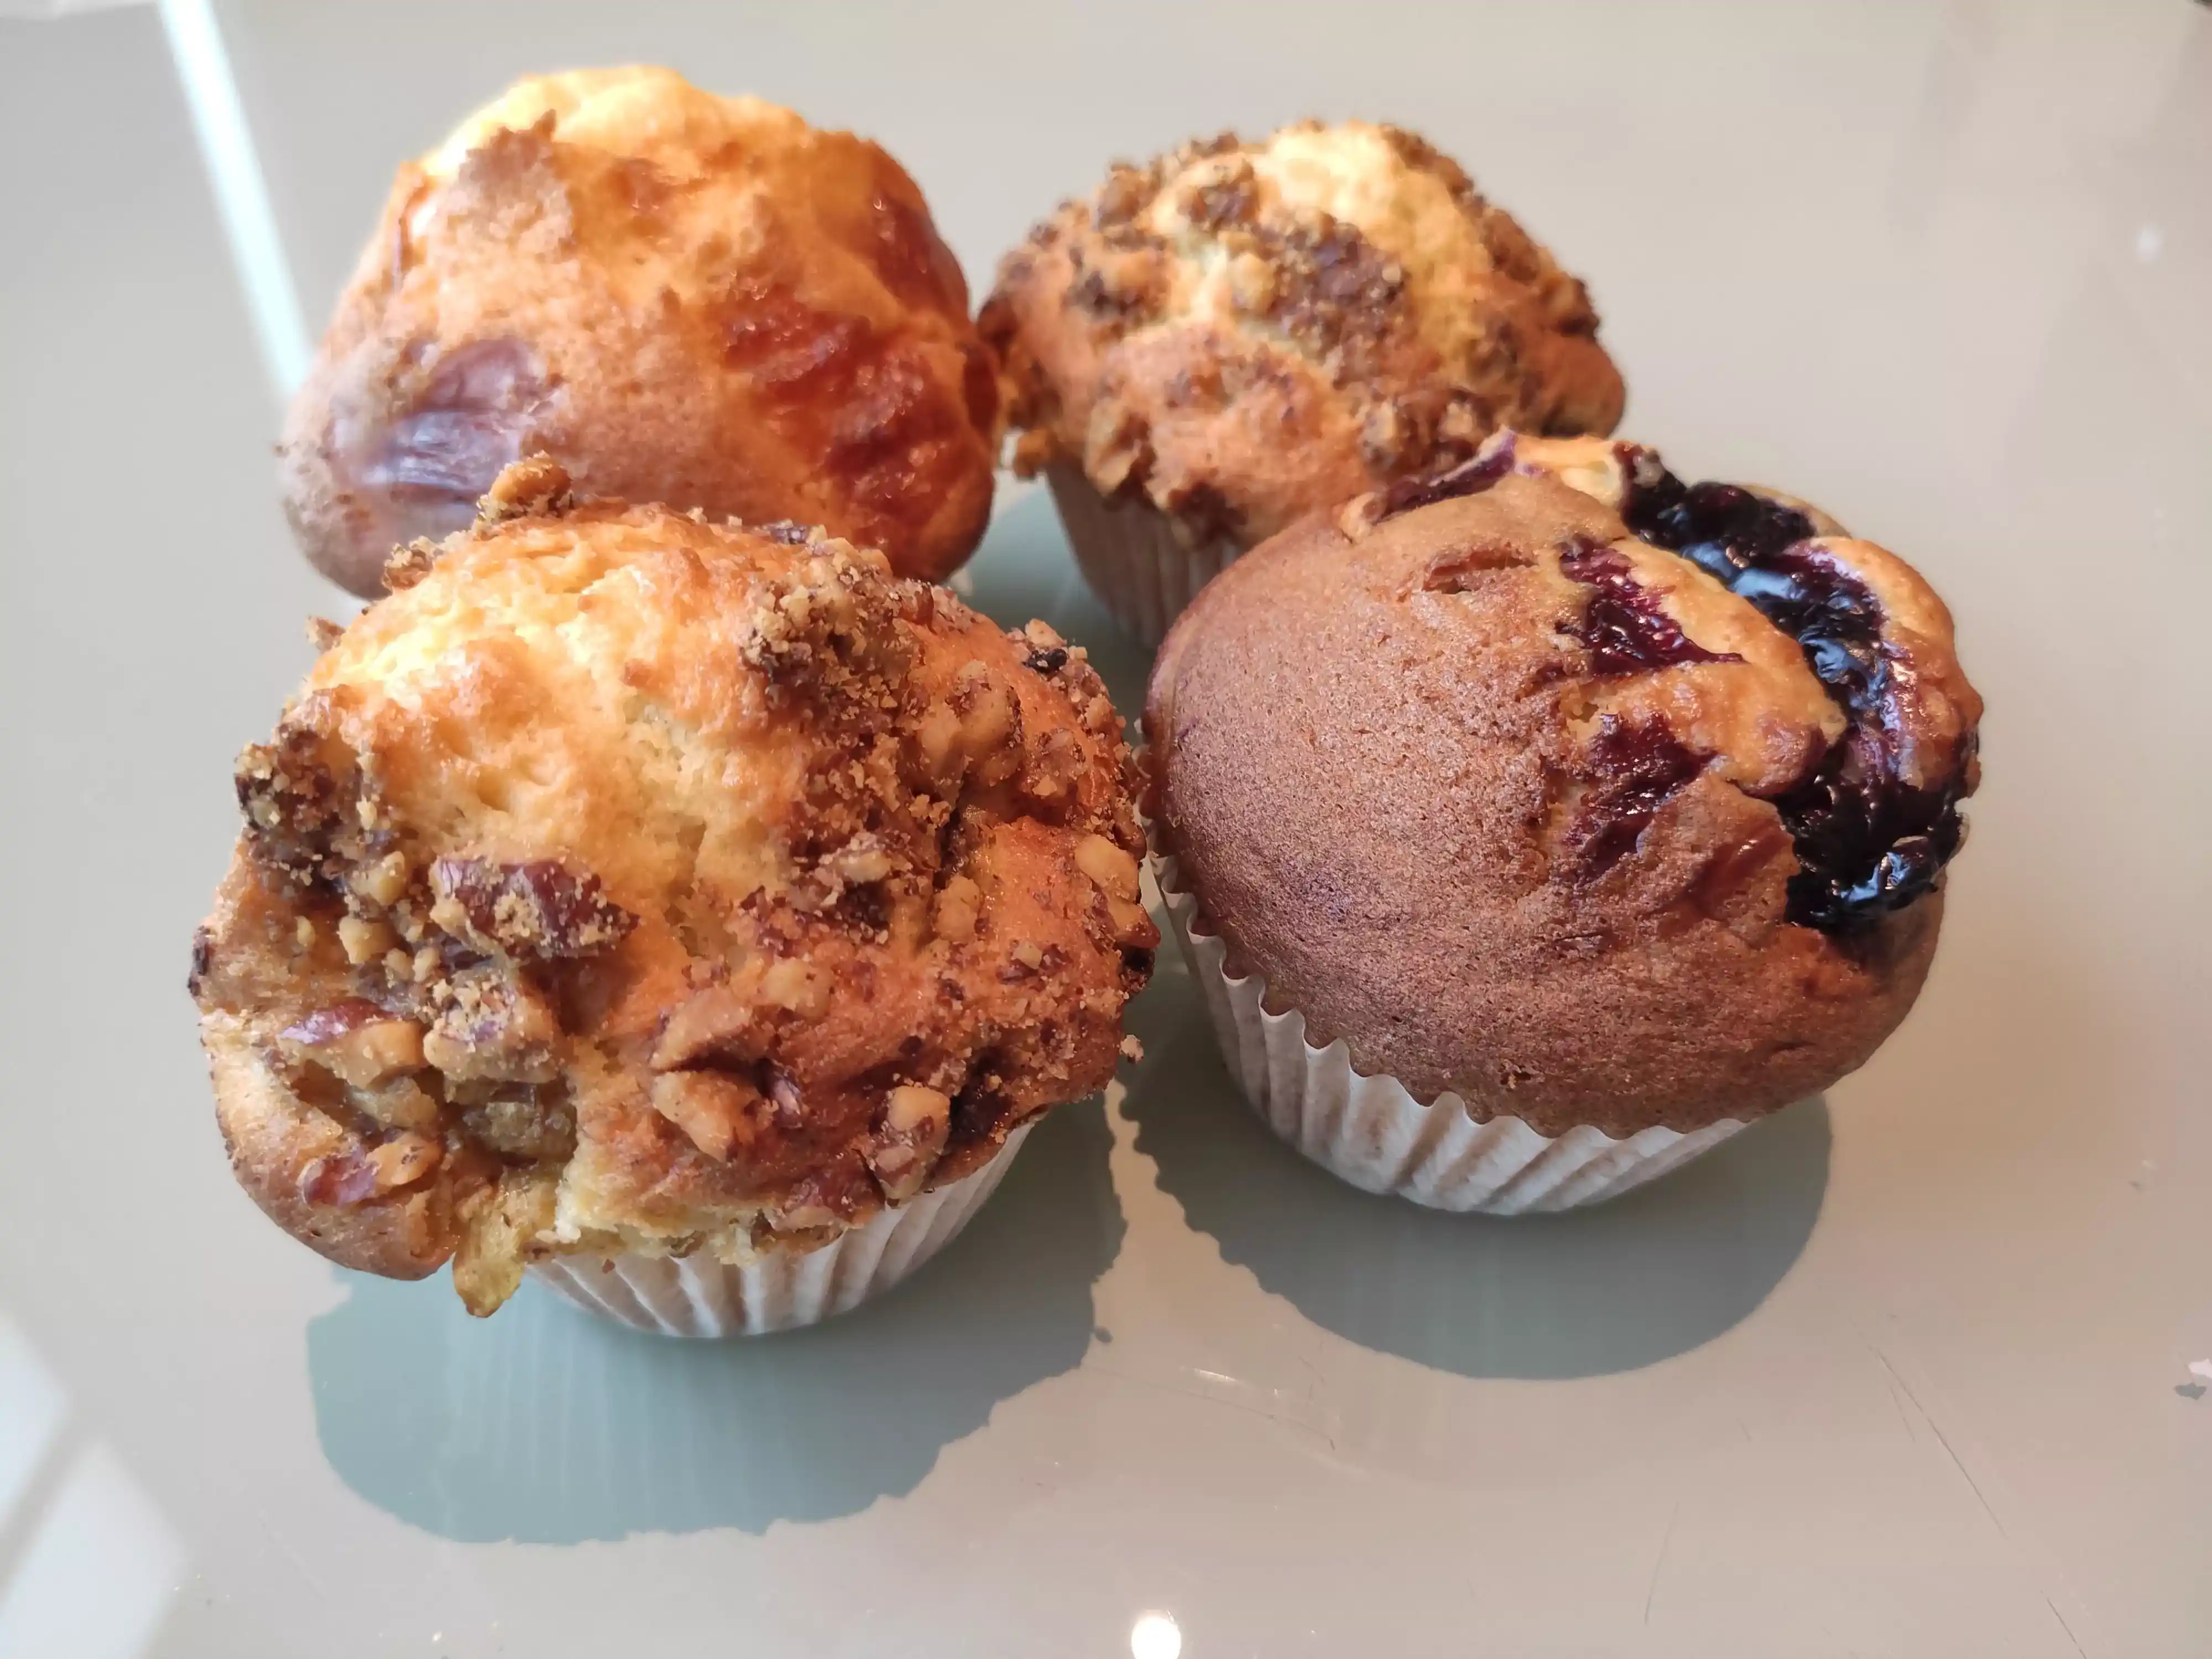 Review: SL II Muffin (Singapore)